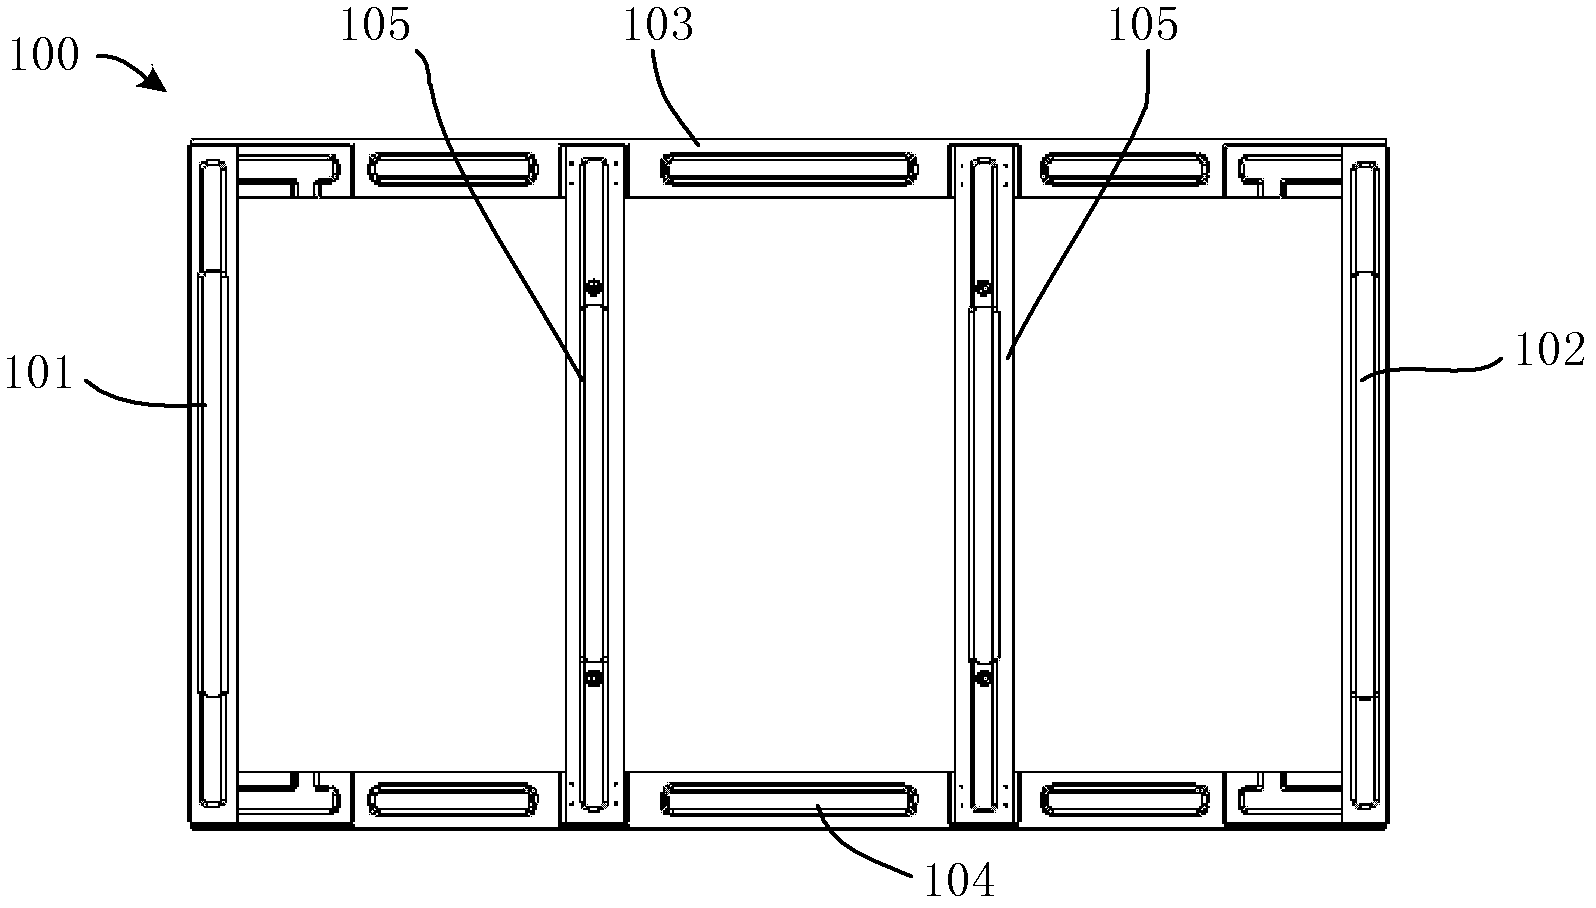 Back plate and backlight module using same